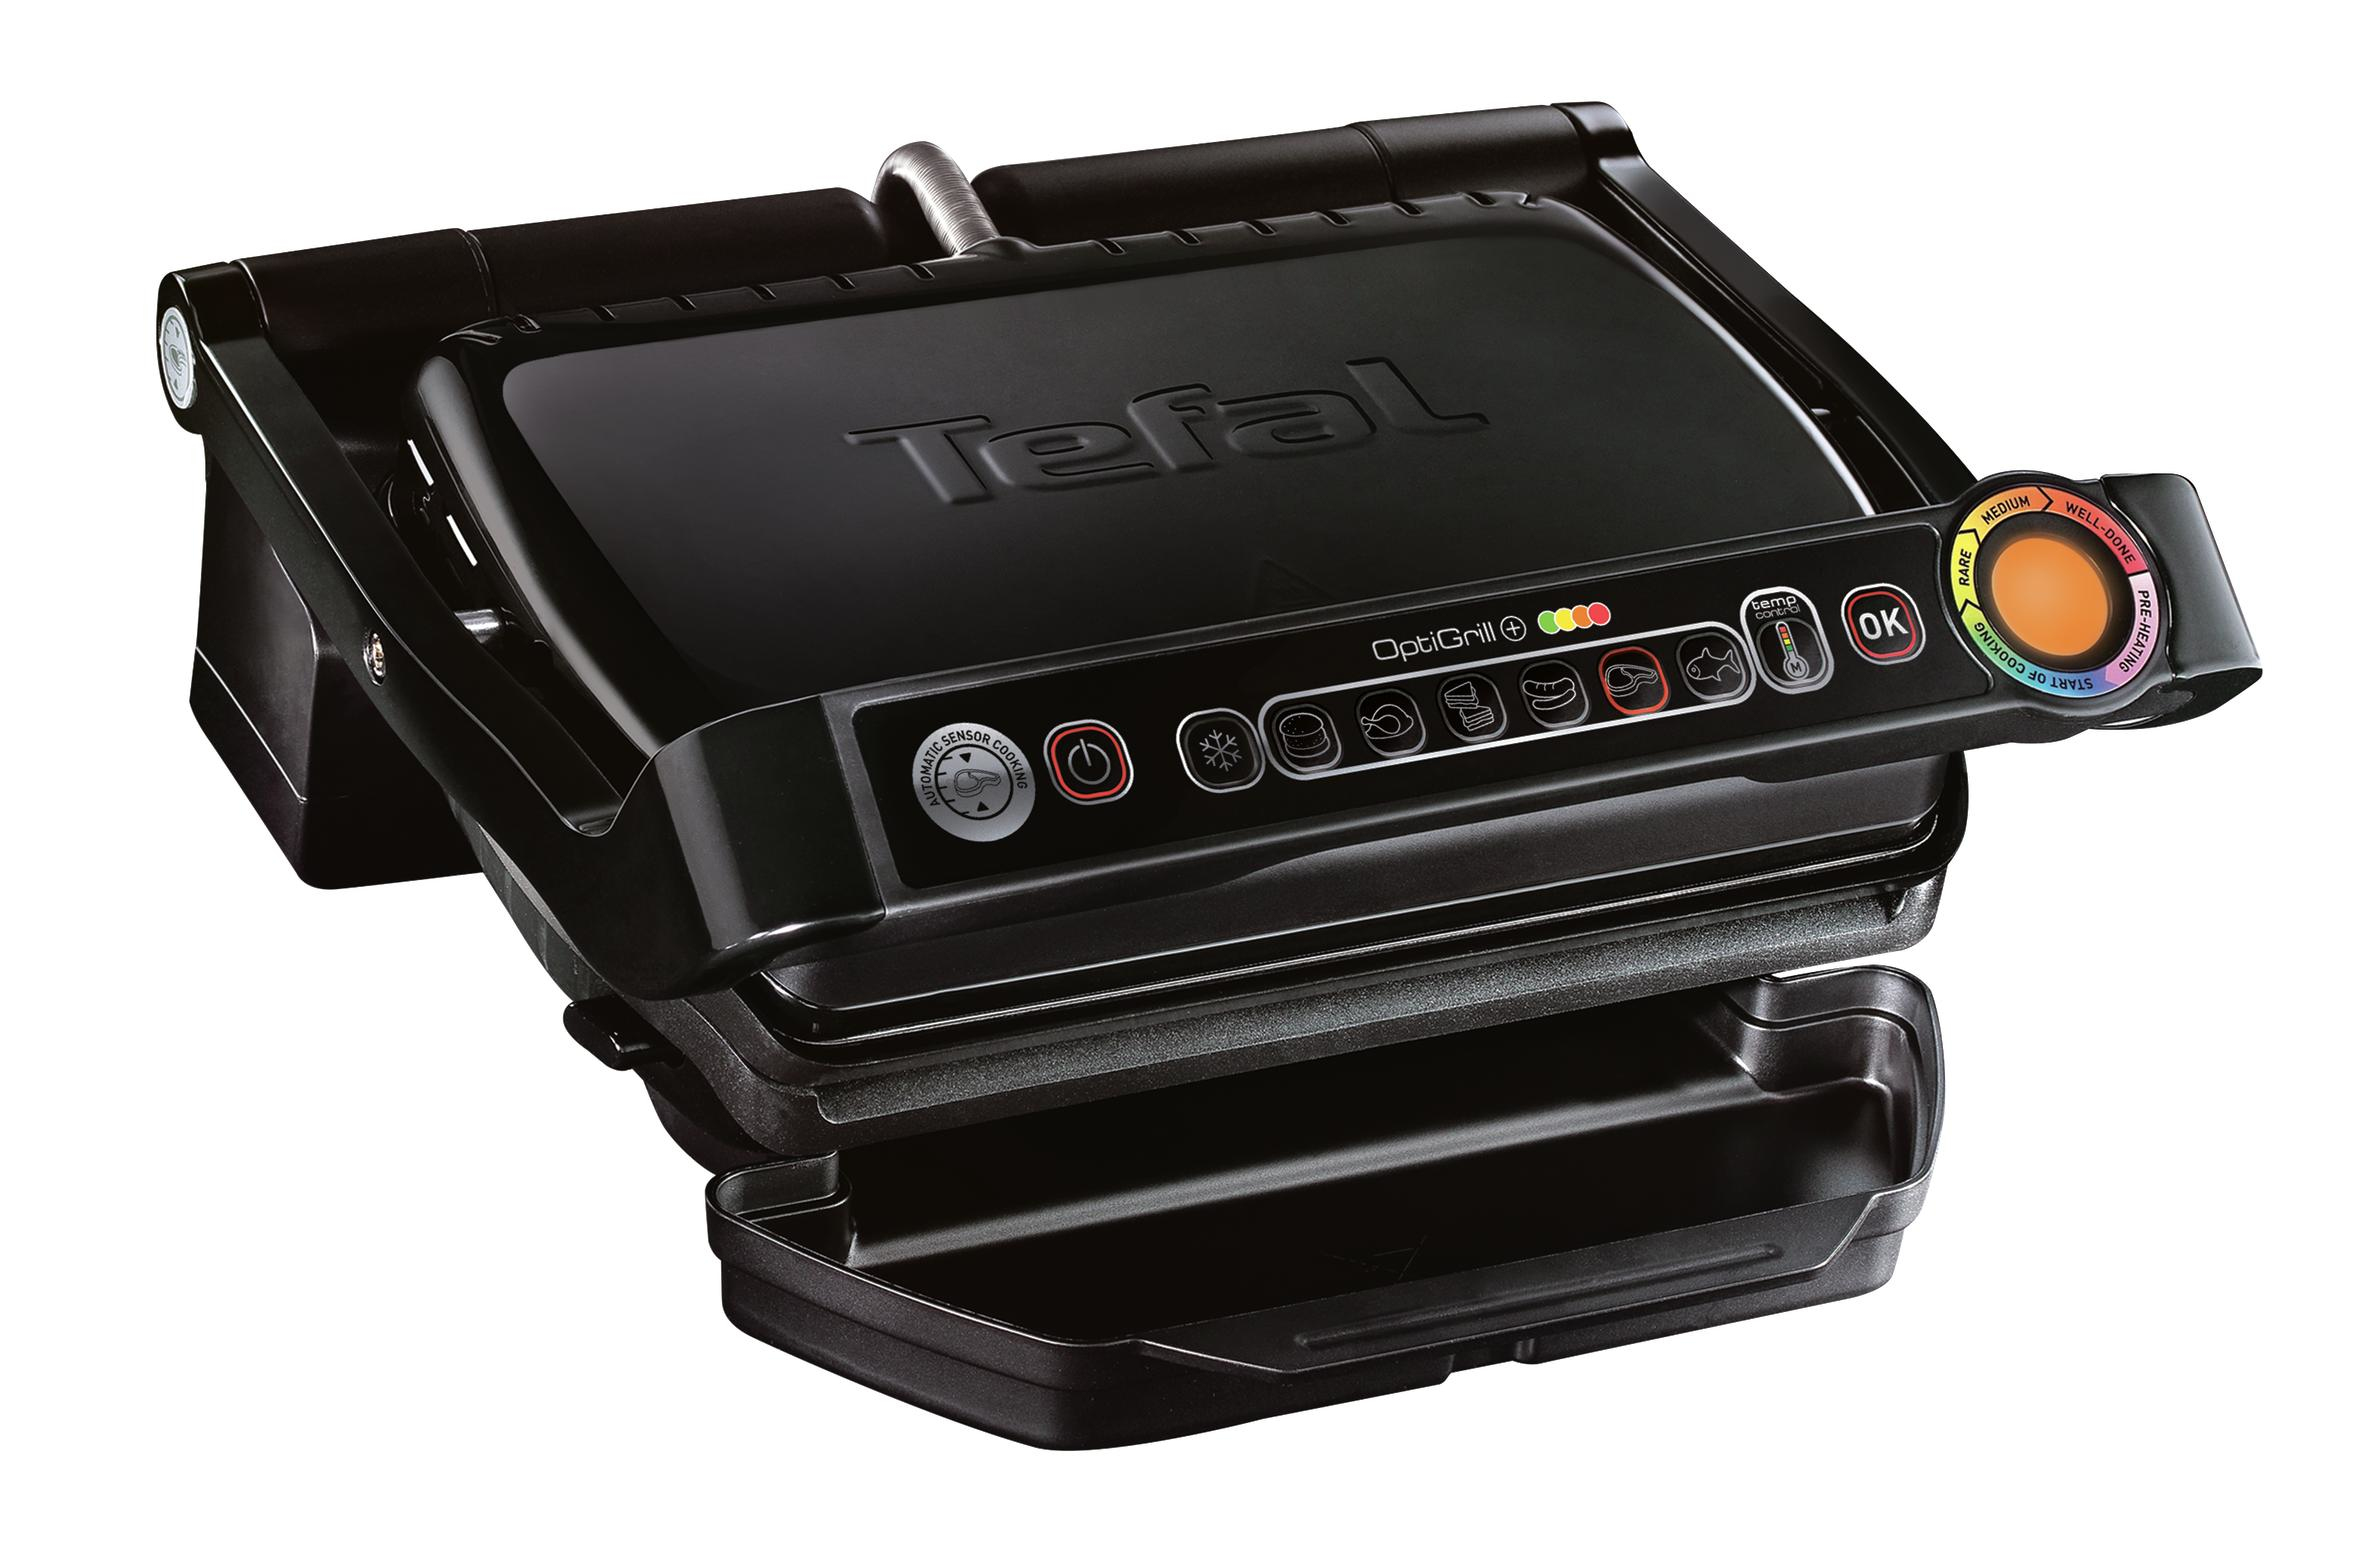 Tefal Table Party GC7148